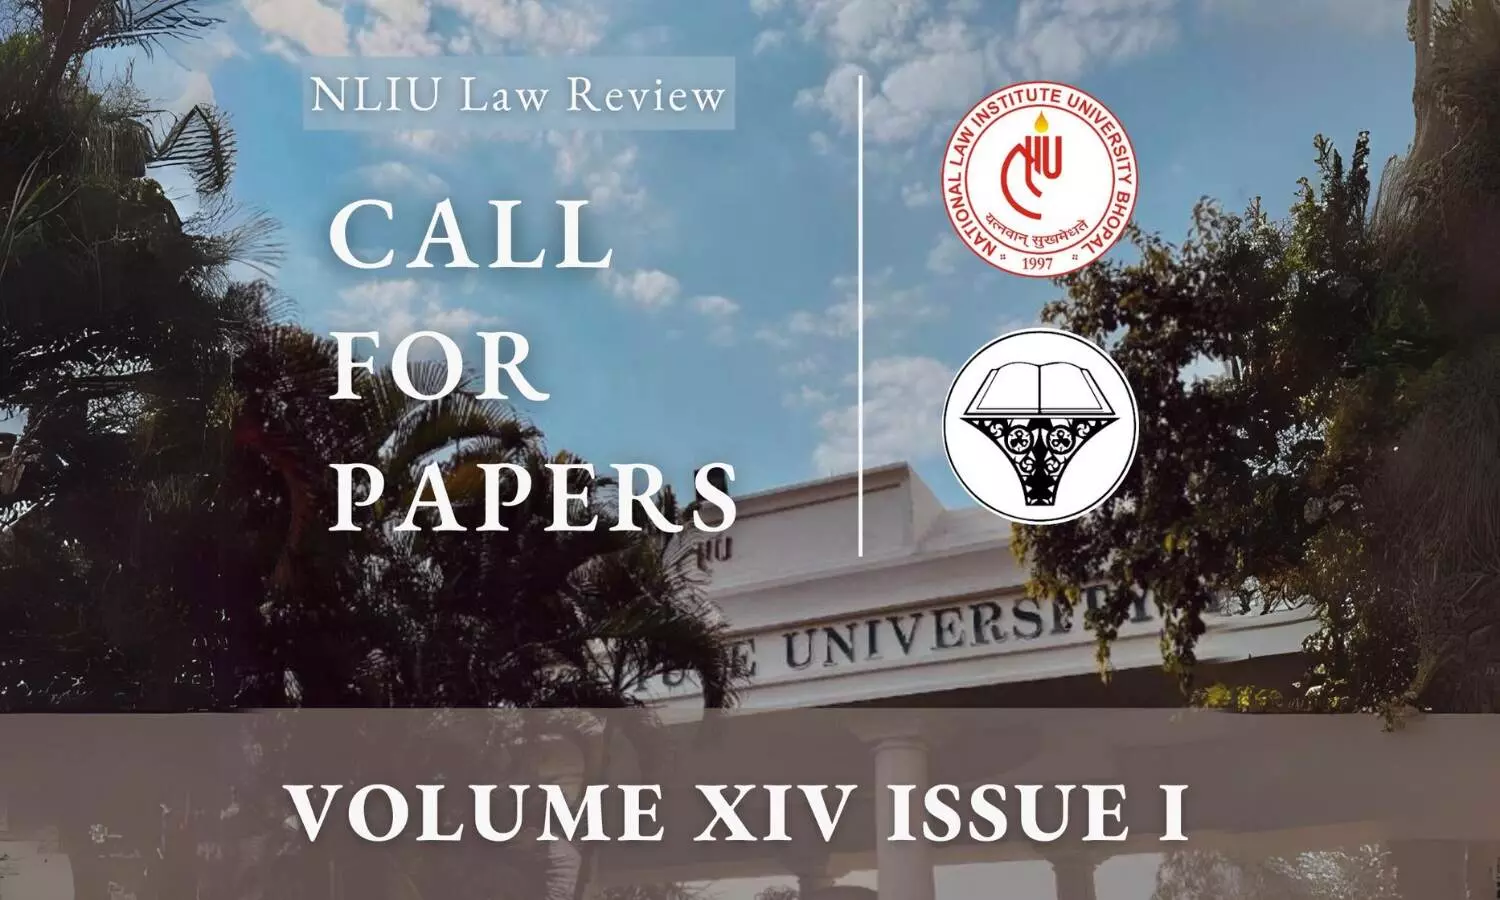 Call for Papers NLIU Law Review Volume XIV Issue I